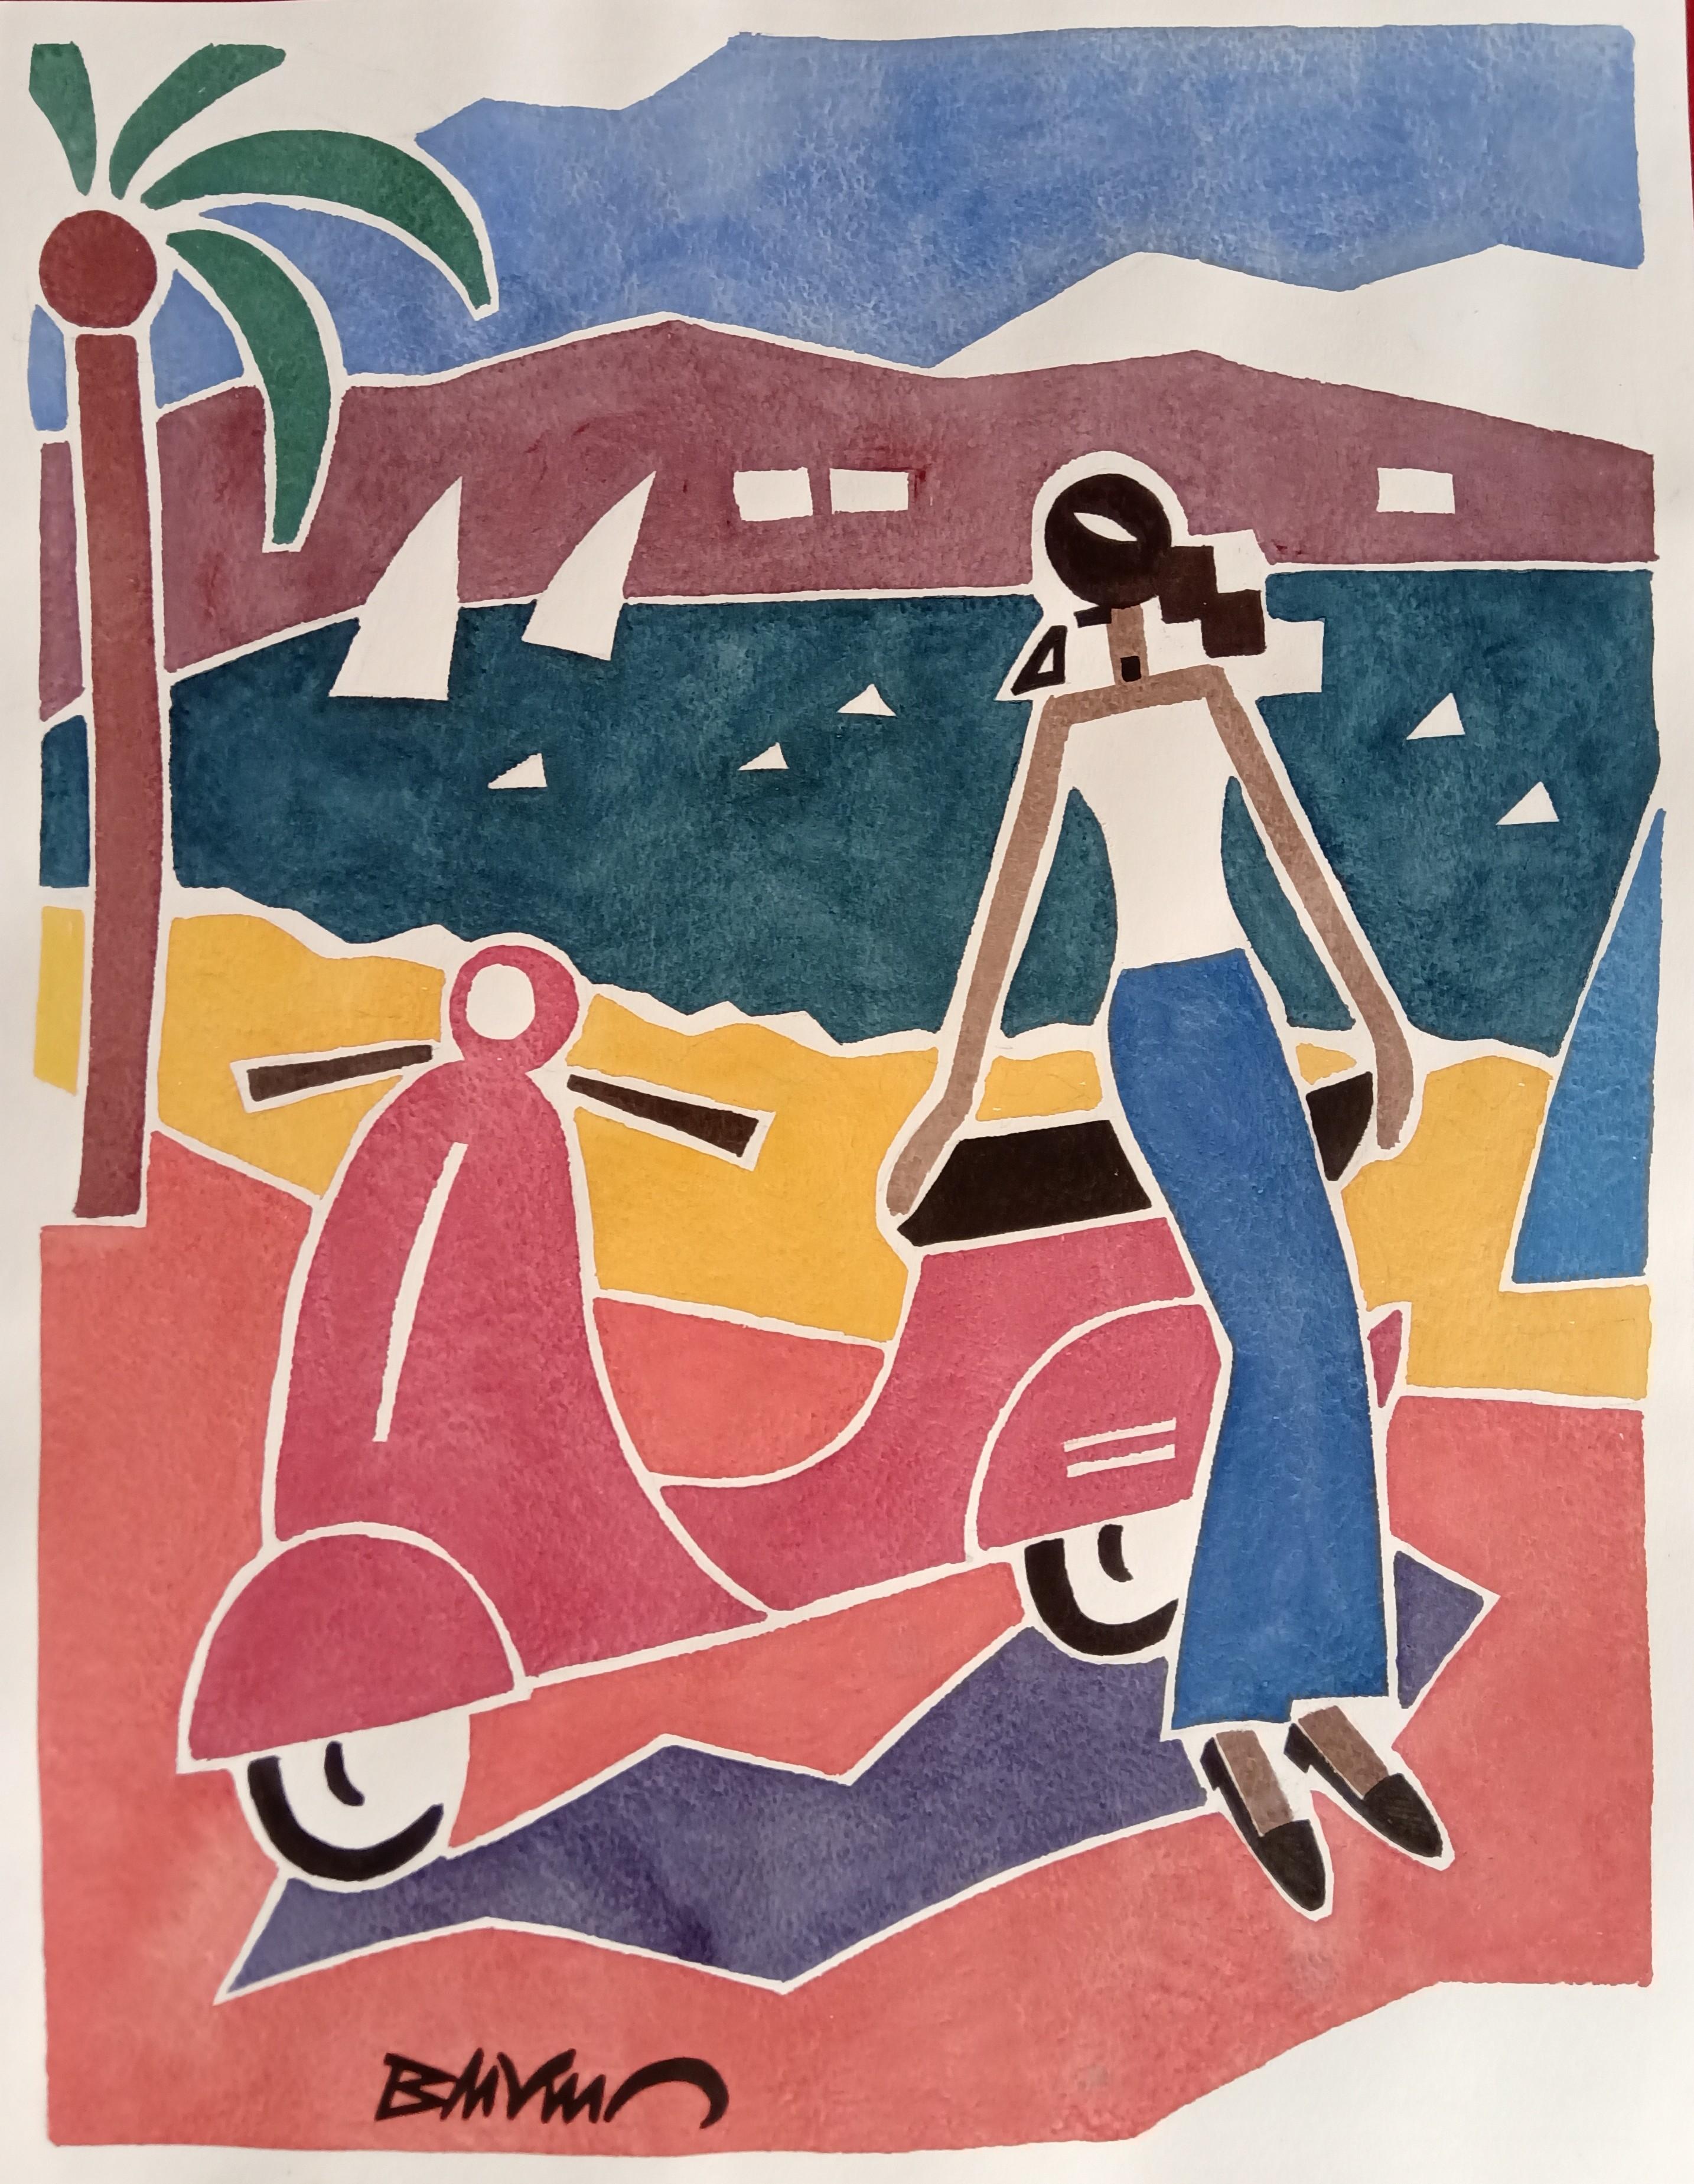 "Woman on a scooter" figurative water colour, china ink on paper. - Art by Bertrand de Vismes